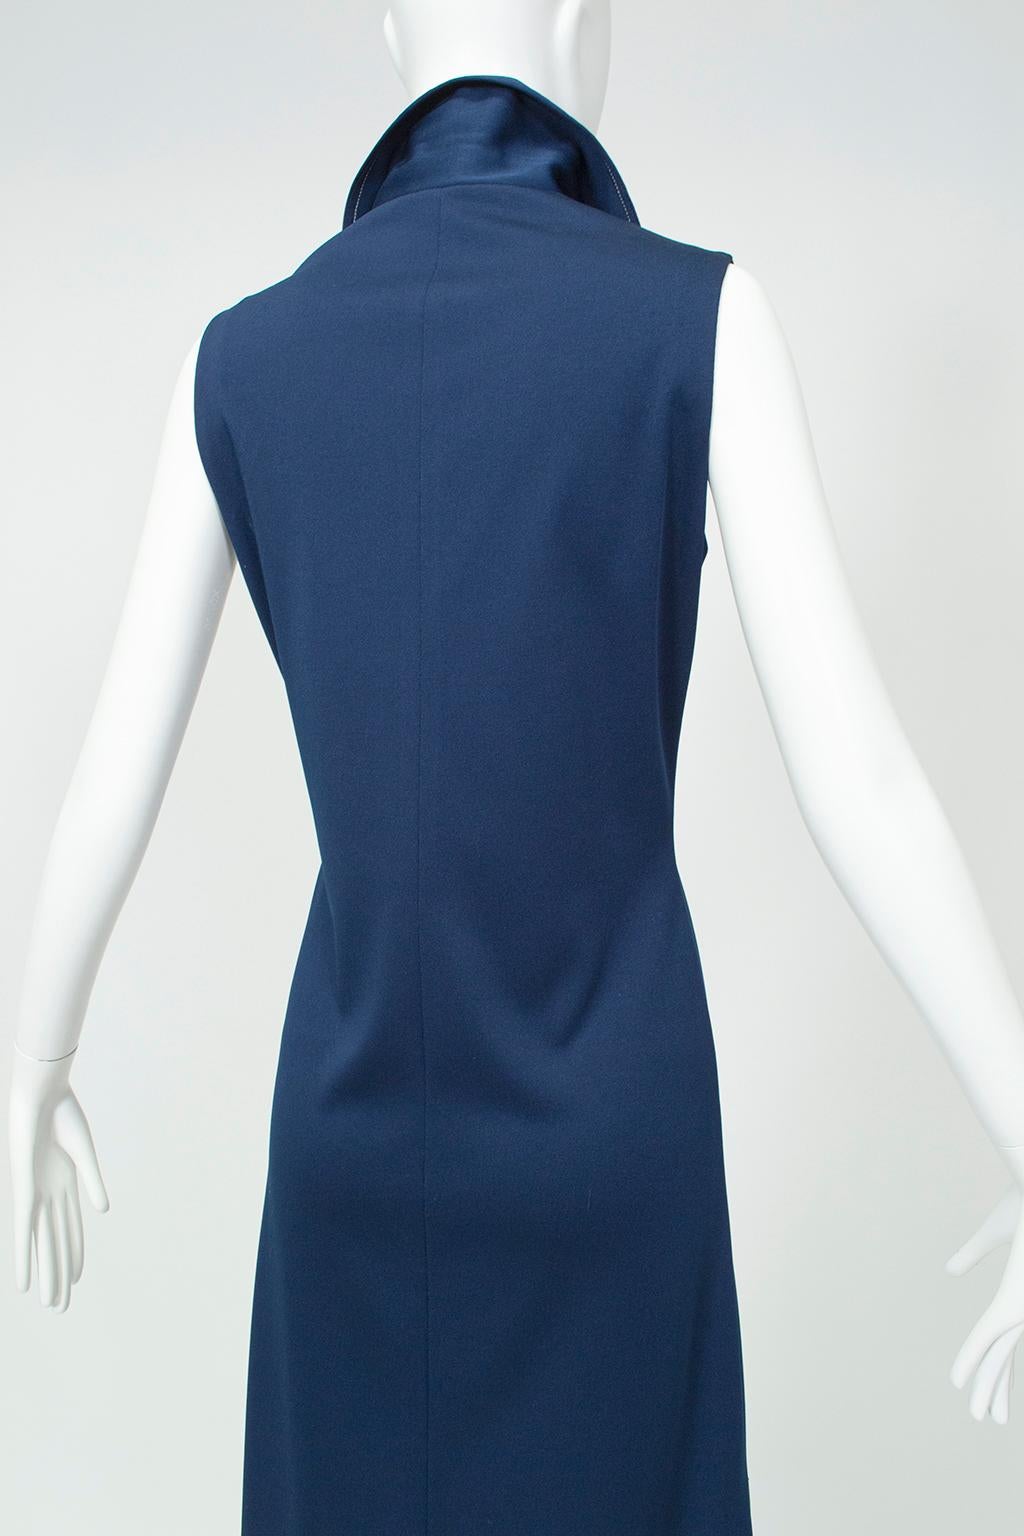 Sleeveless Navy Jersey Sailor Dress with Nautical Buttons – M, 1960s In Excellent Condition For Sale In Tucson, AZ